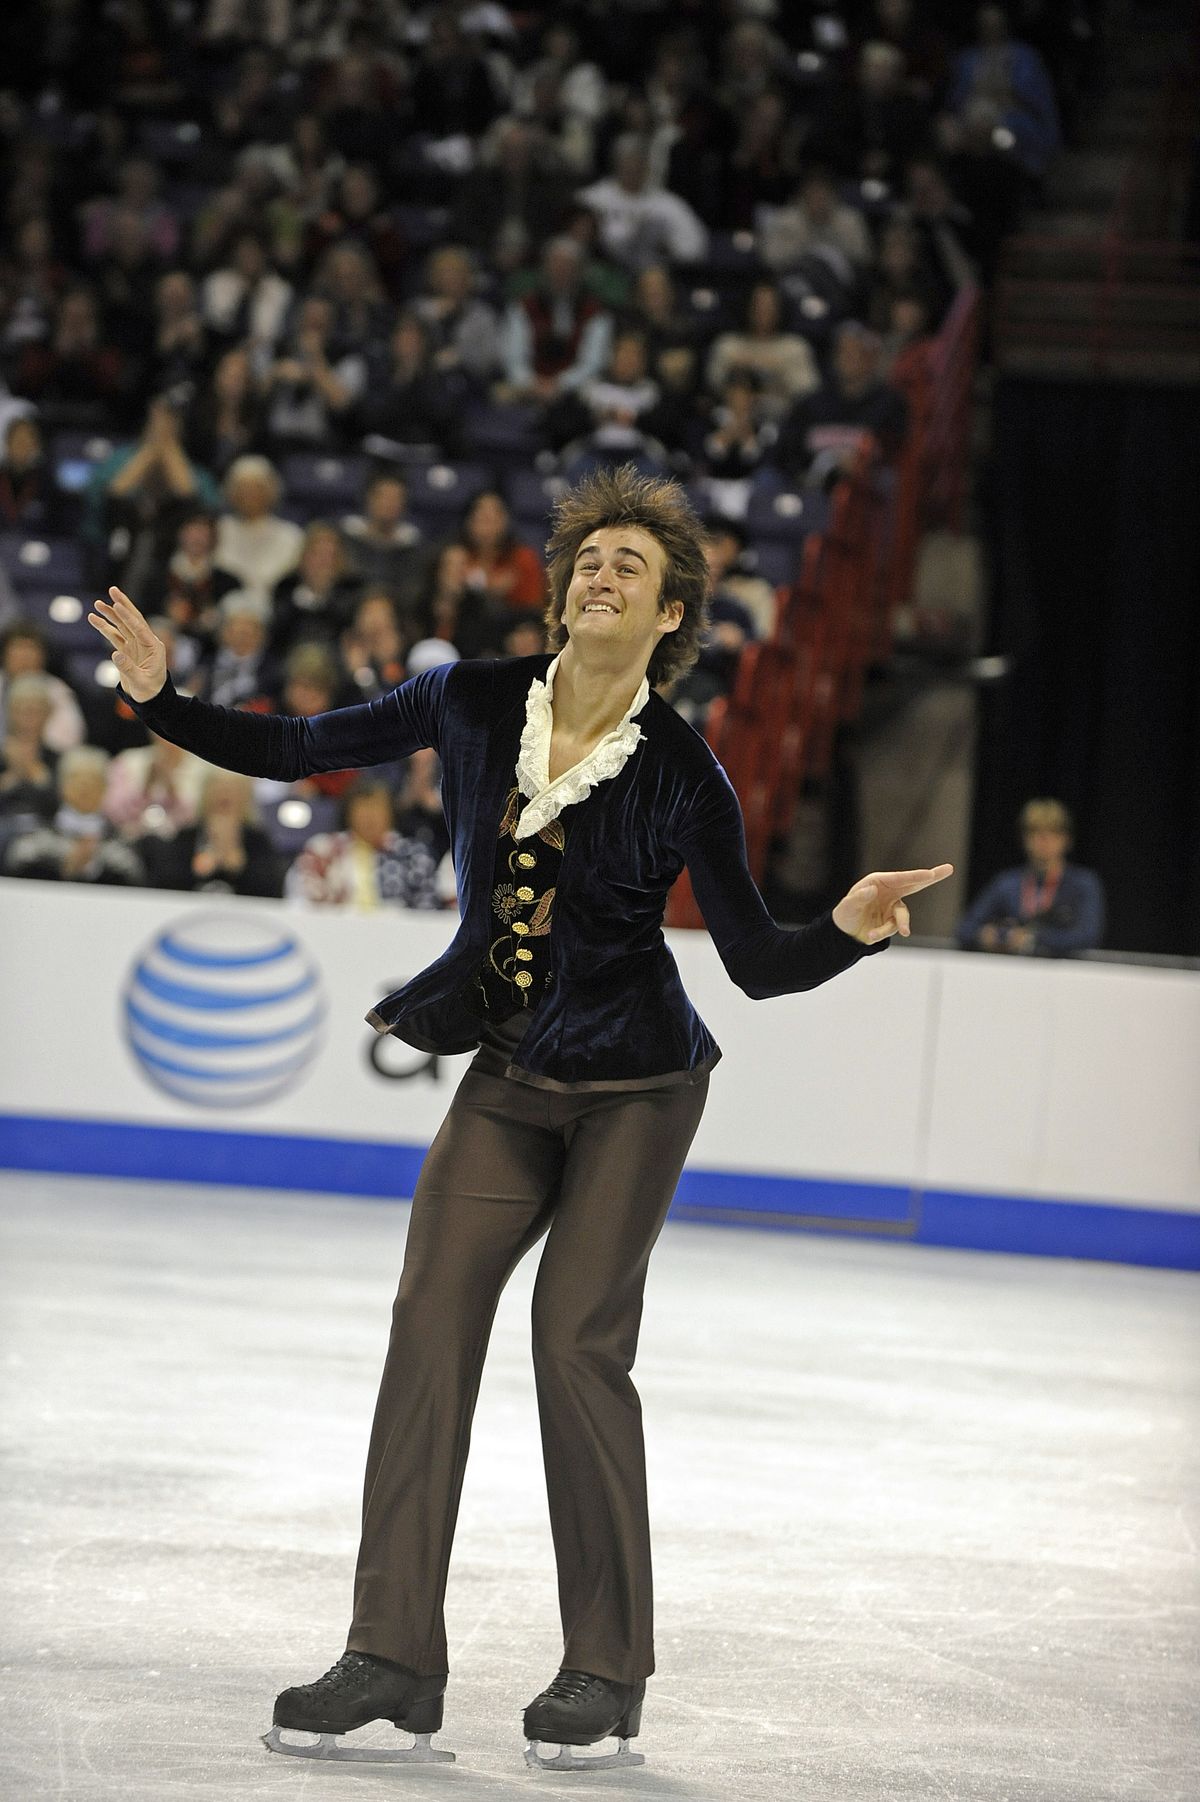 Ryan Bradley plays to the crowd on the way to second place in the free skate. He finished fourth overall. (CHRISTOPHER ANDERSON)